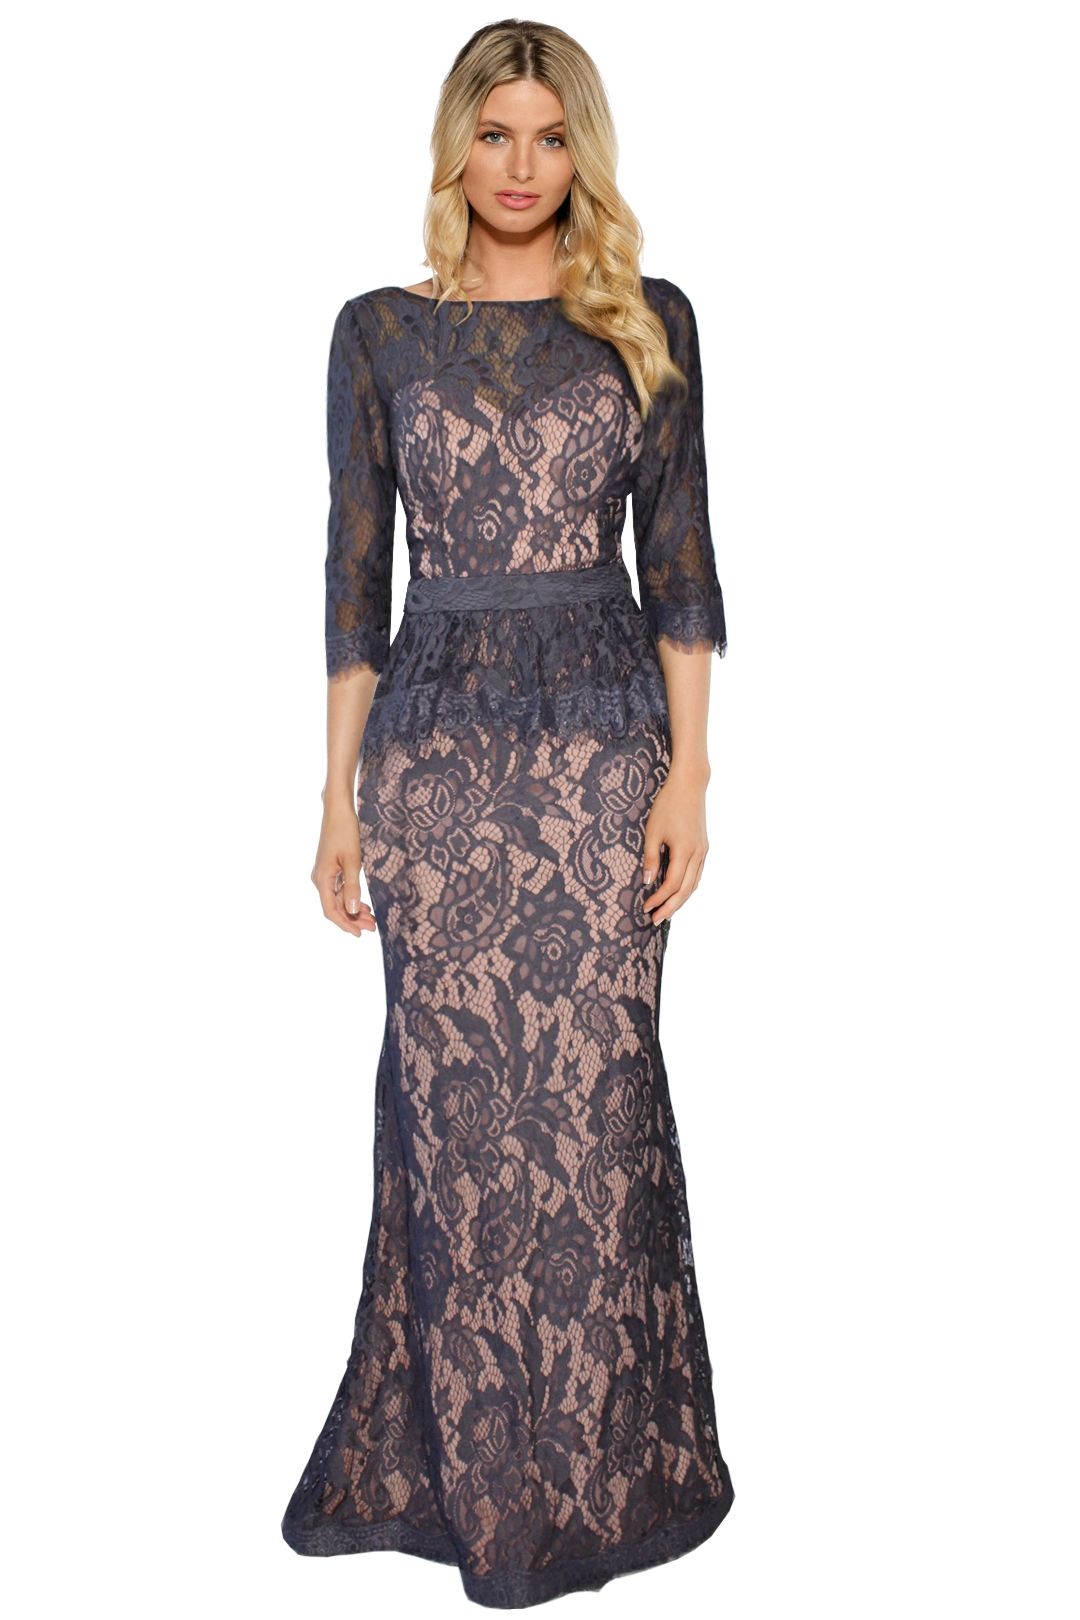 Jadore - Tessa Lace Gown - Grey Lace - Front